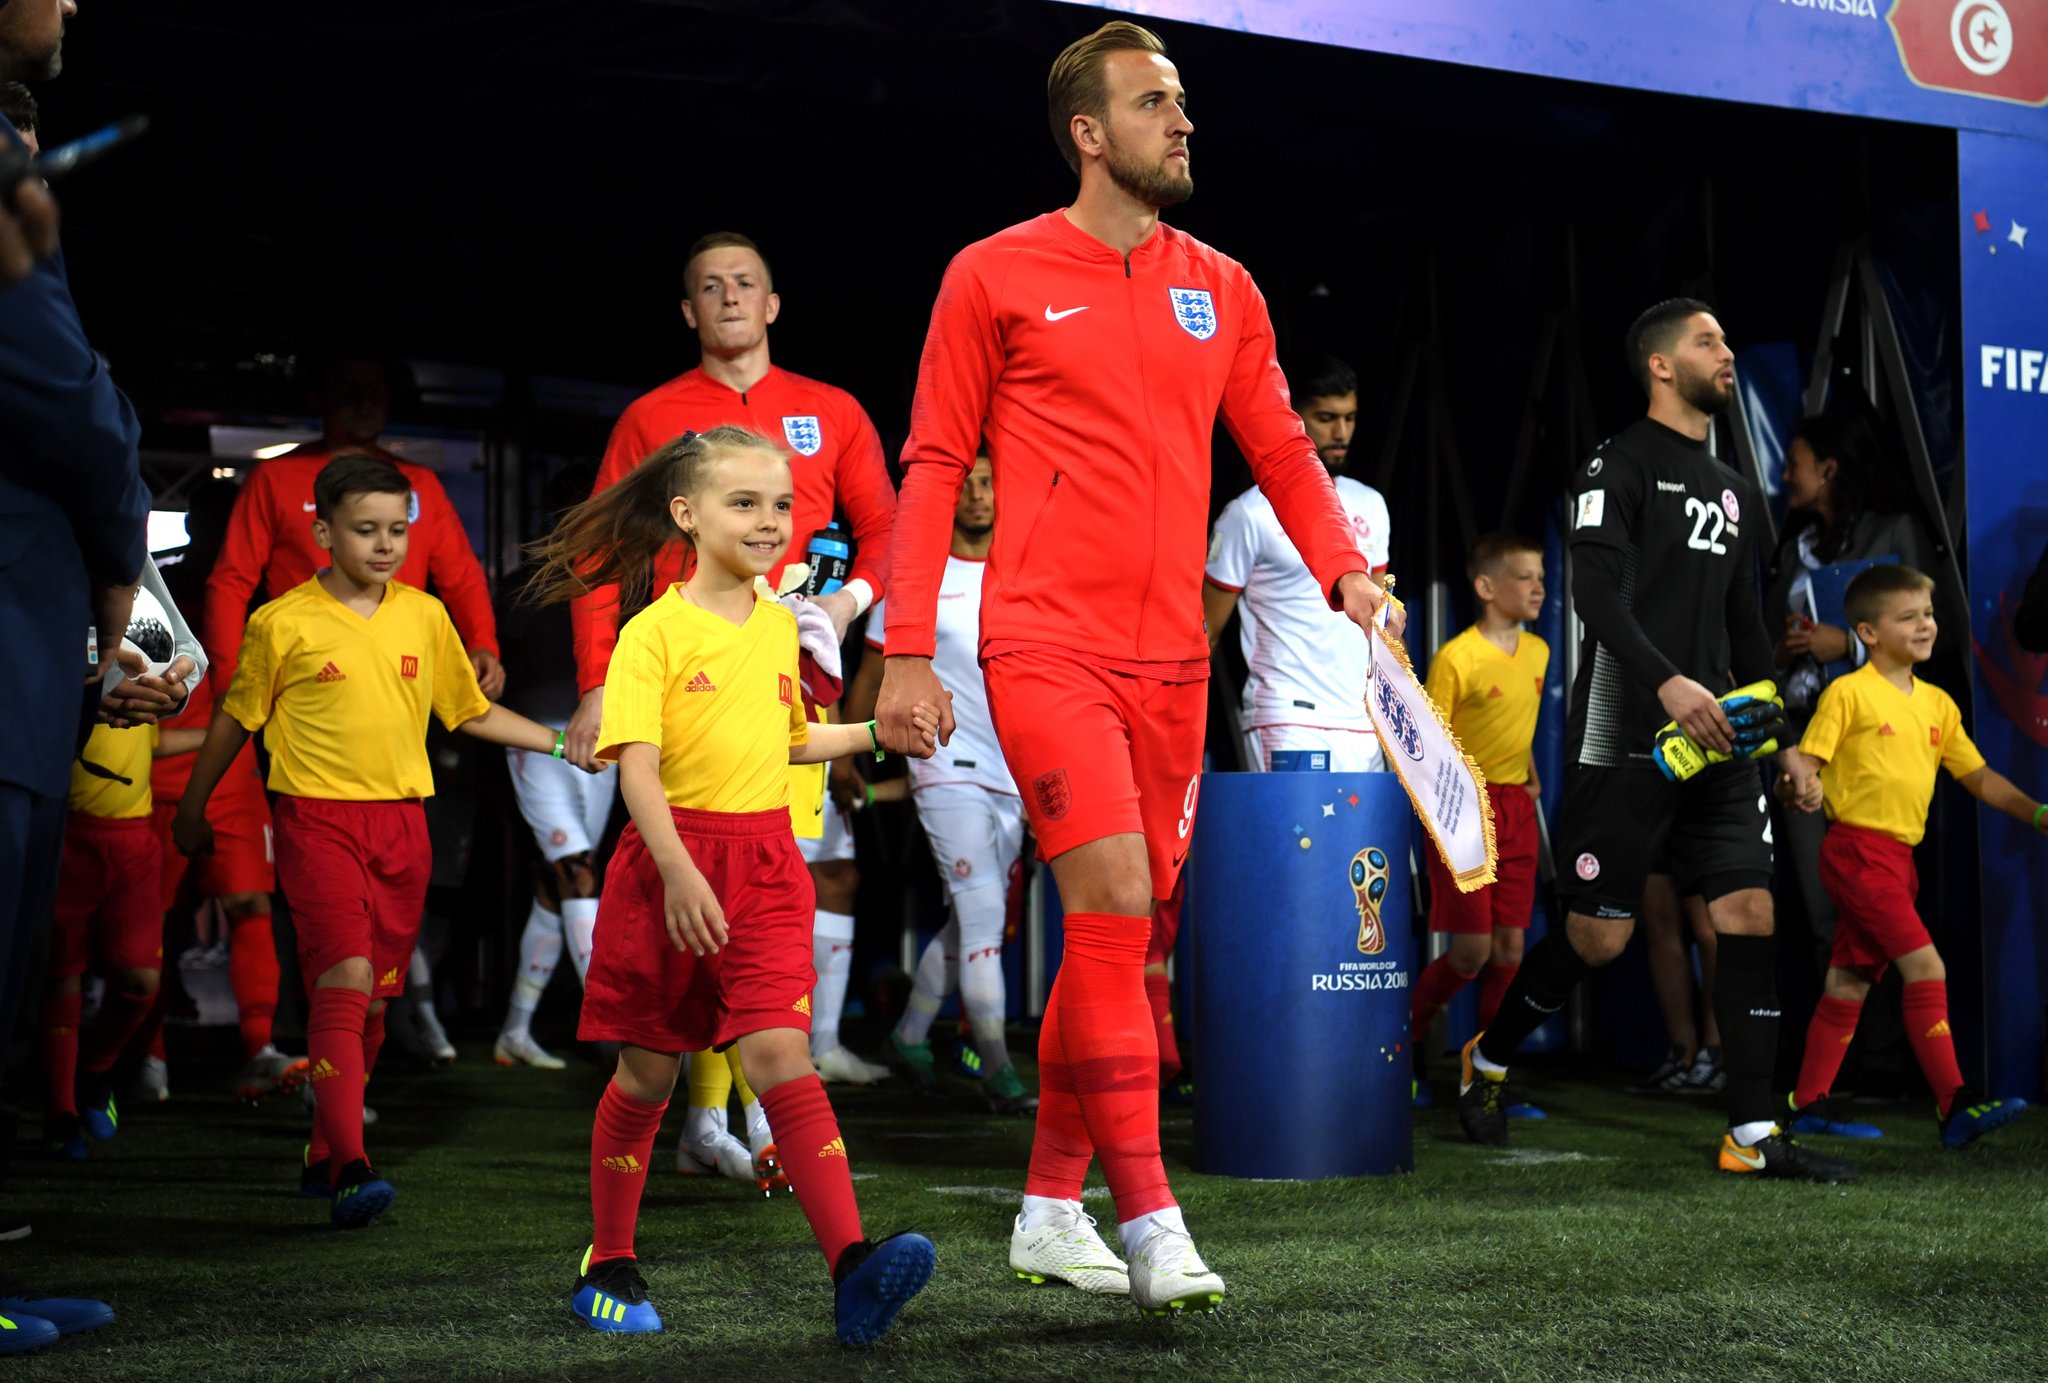 Harry Kane on X: "A very proud moment to lead out my country at the  #WorldCup last night. Seen some celebration videos from back home - love  them. Your support is great